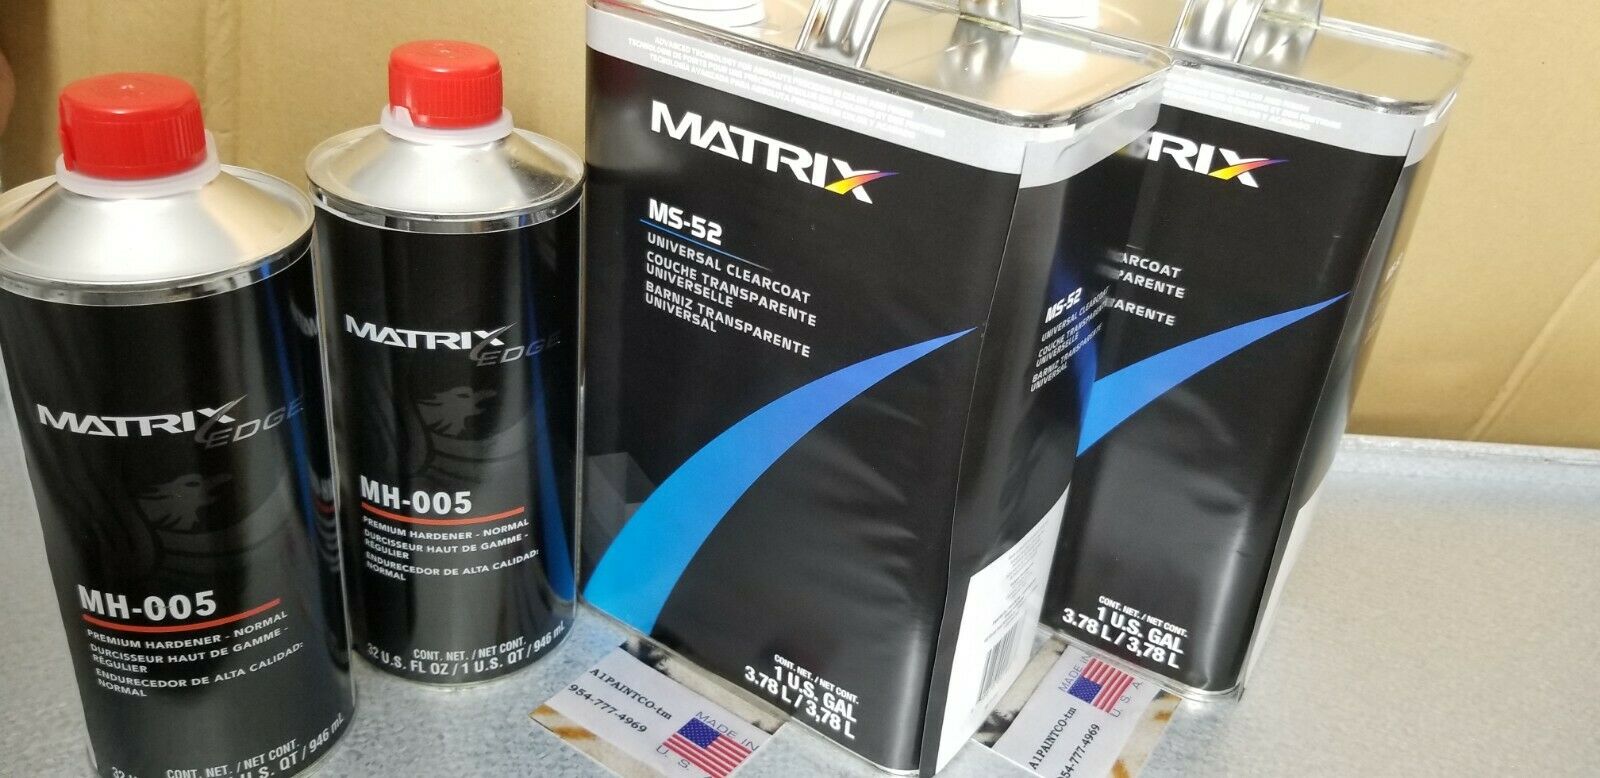 BUNDLE Special- 2 GALLON KITS MATRIX MS-52 Universal Clearcoat Gallons with 2 MH-005 Normal Hardener Quarts